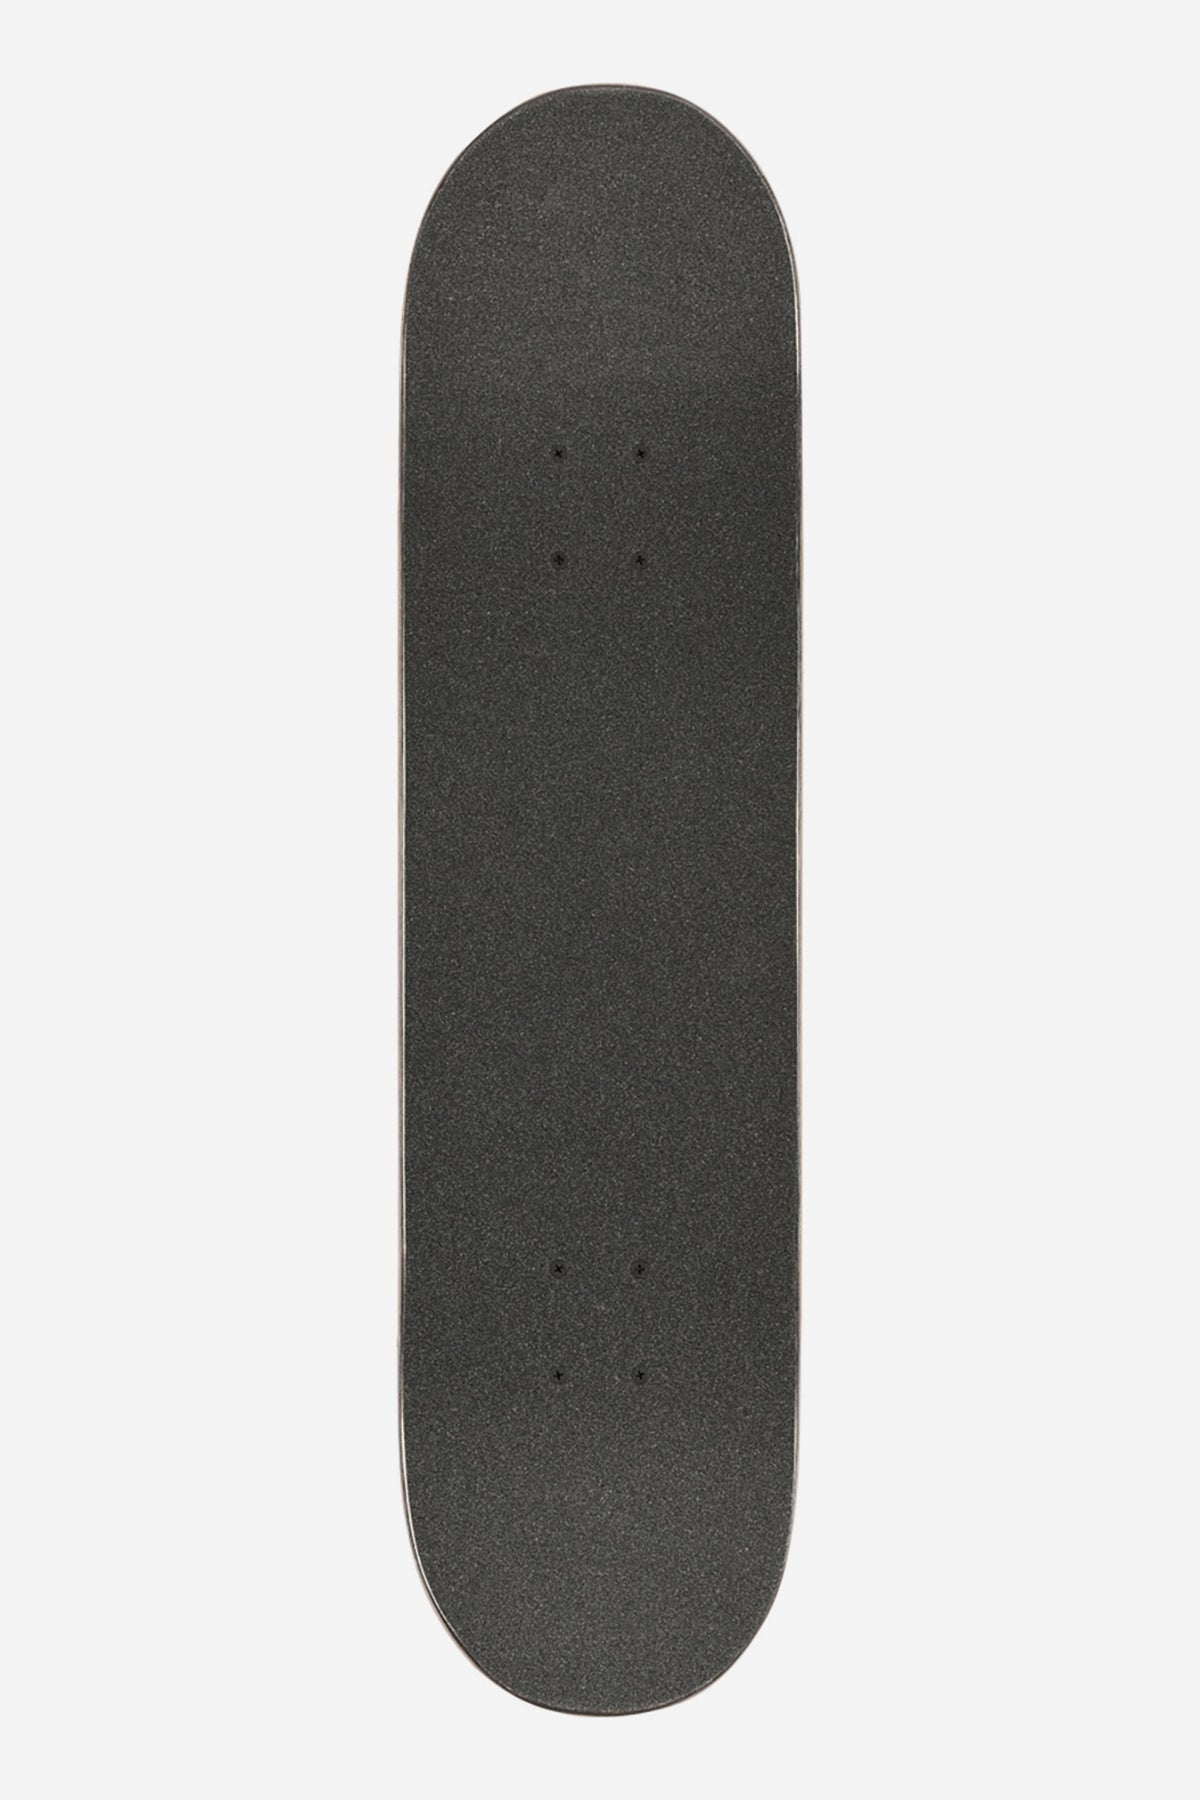 grip tape of Goodstock 8.5" Complete - Clay